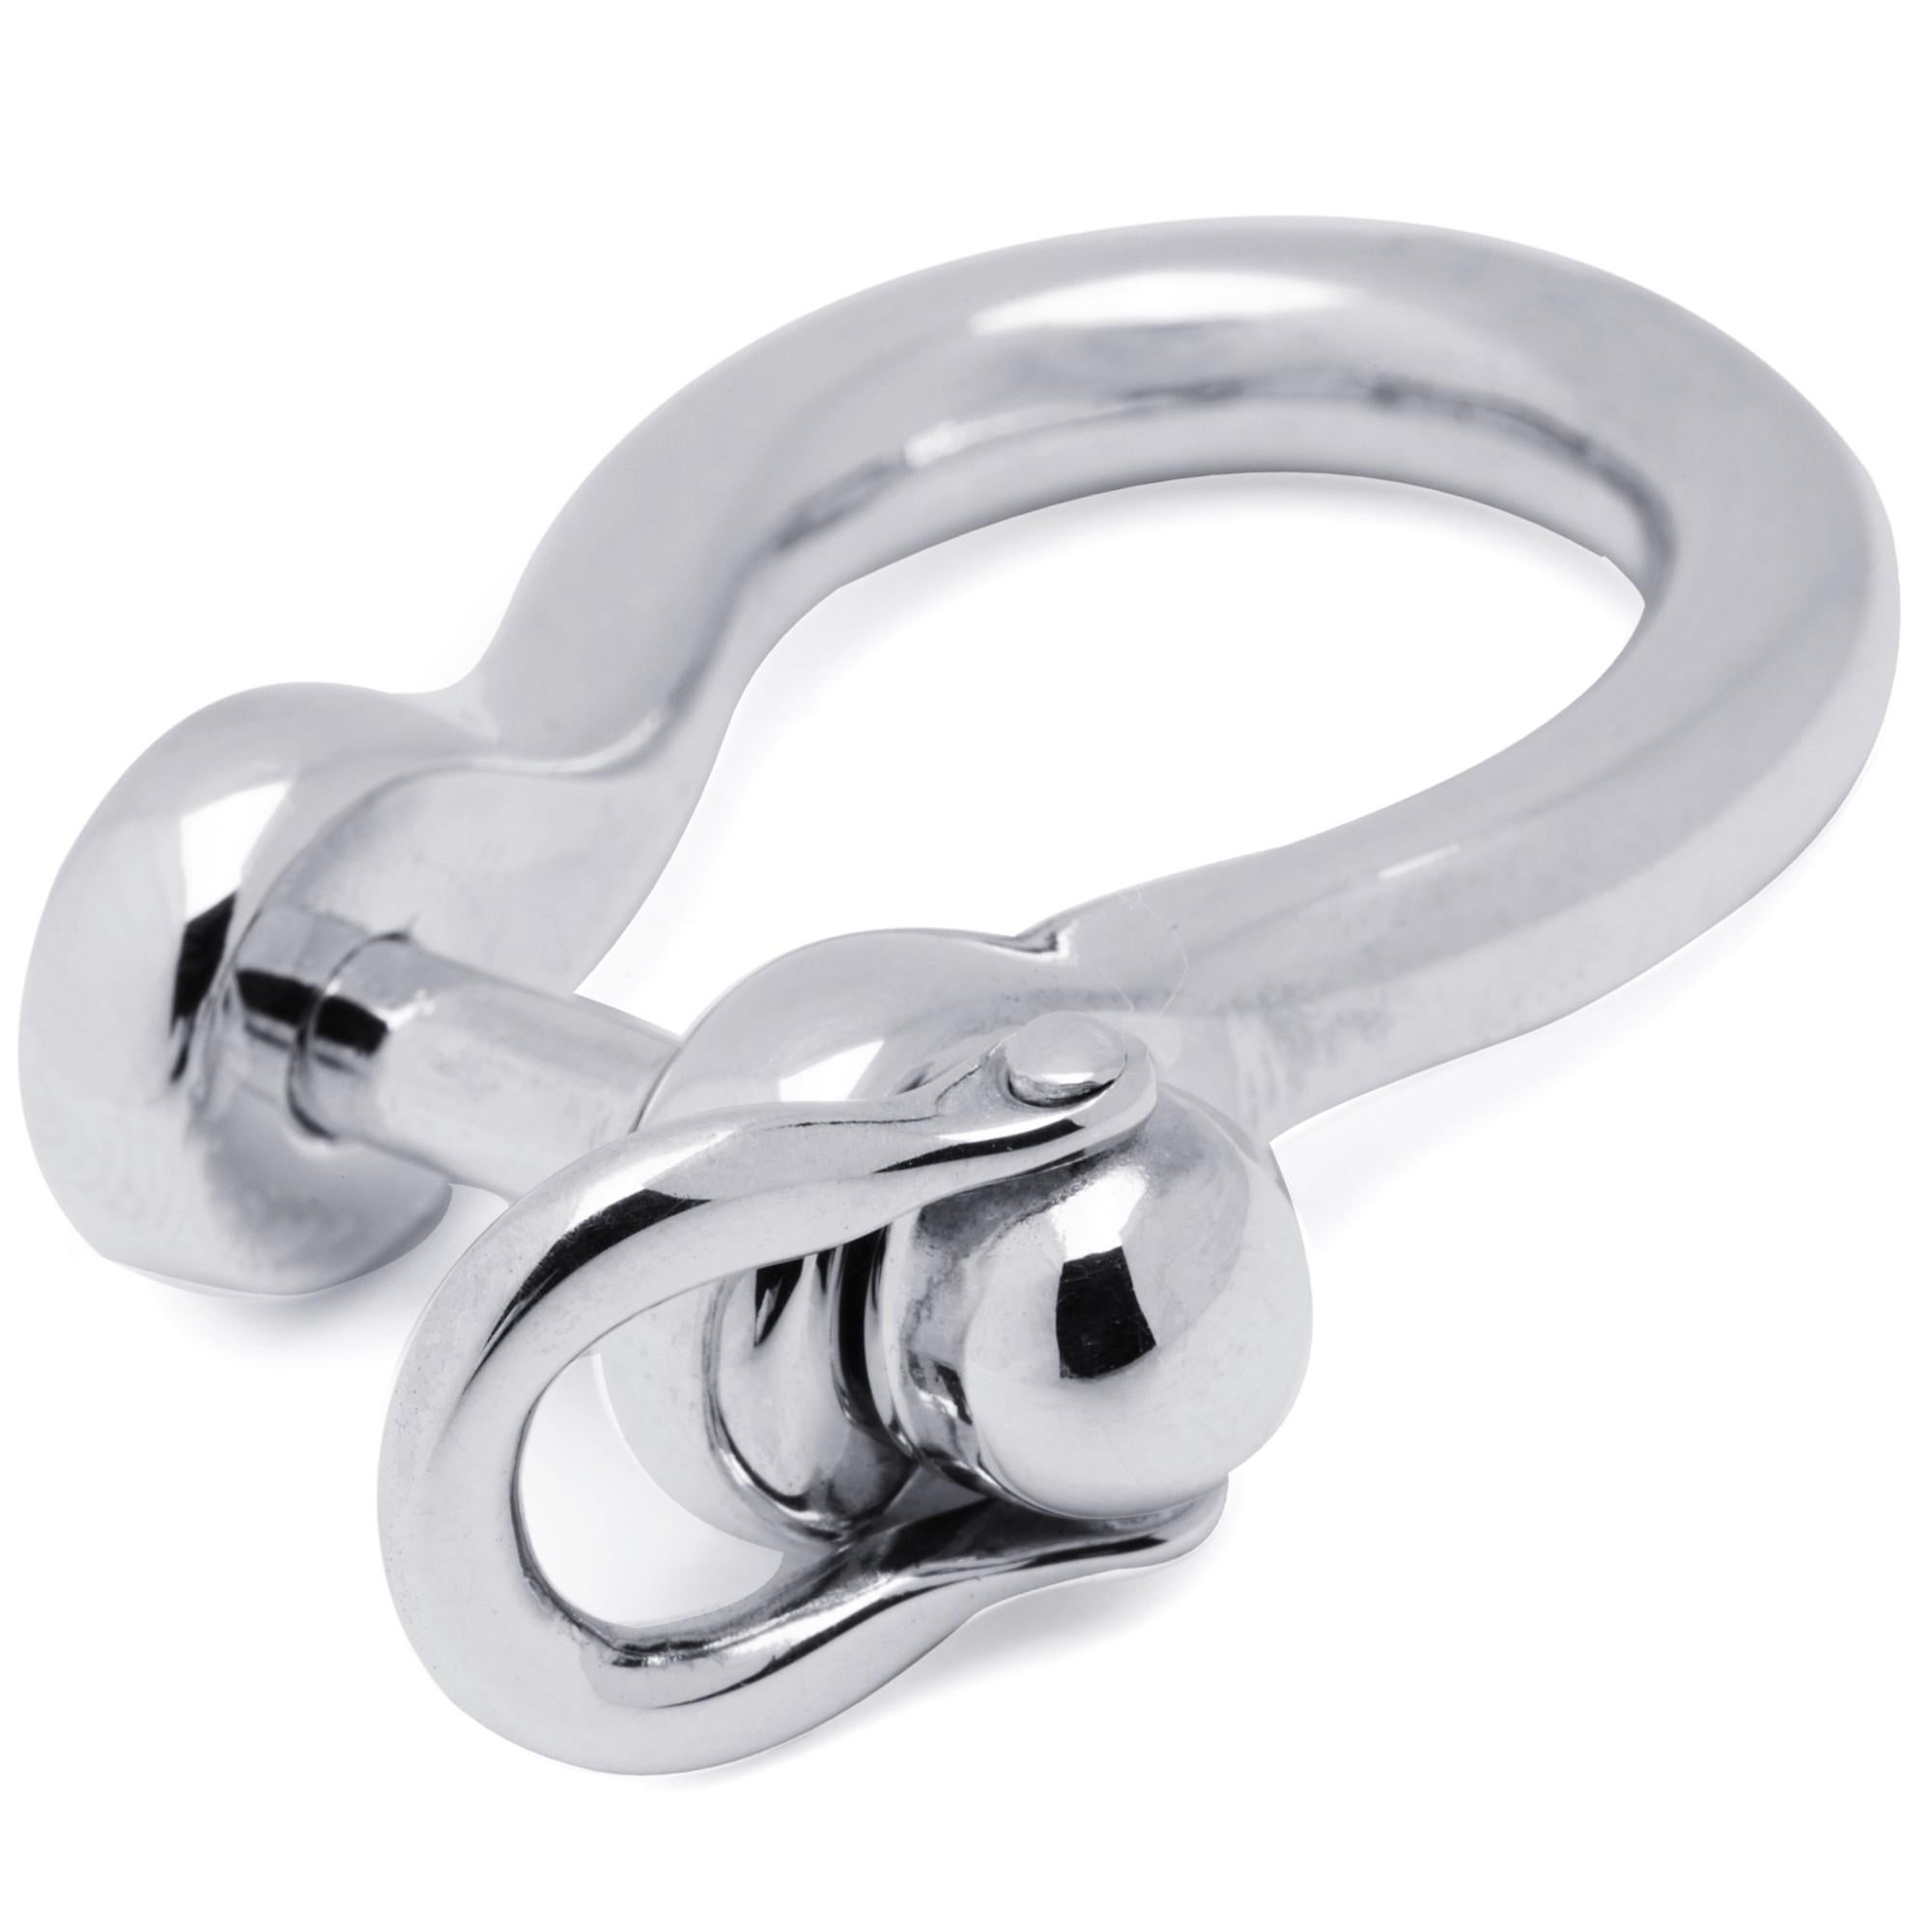 Alex Jona design collection, hand crafted in Italy, Shackle Sterling Silver key holder. 
Dimension: W 1.44 in / 36,57 mm X L 1.34 in/ 34 mm X D 0.42 in / 10,66 mm
Weight : 22 g
Alex Jona gifts stand out, not only for their special design and for the